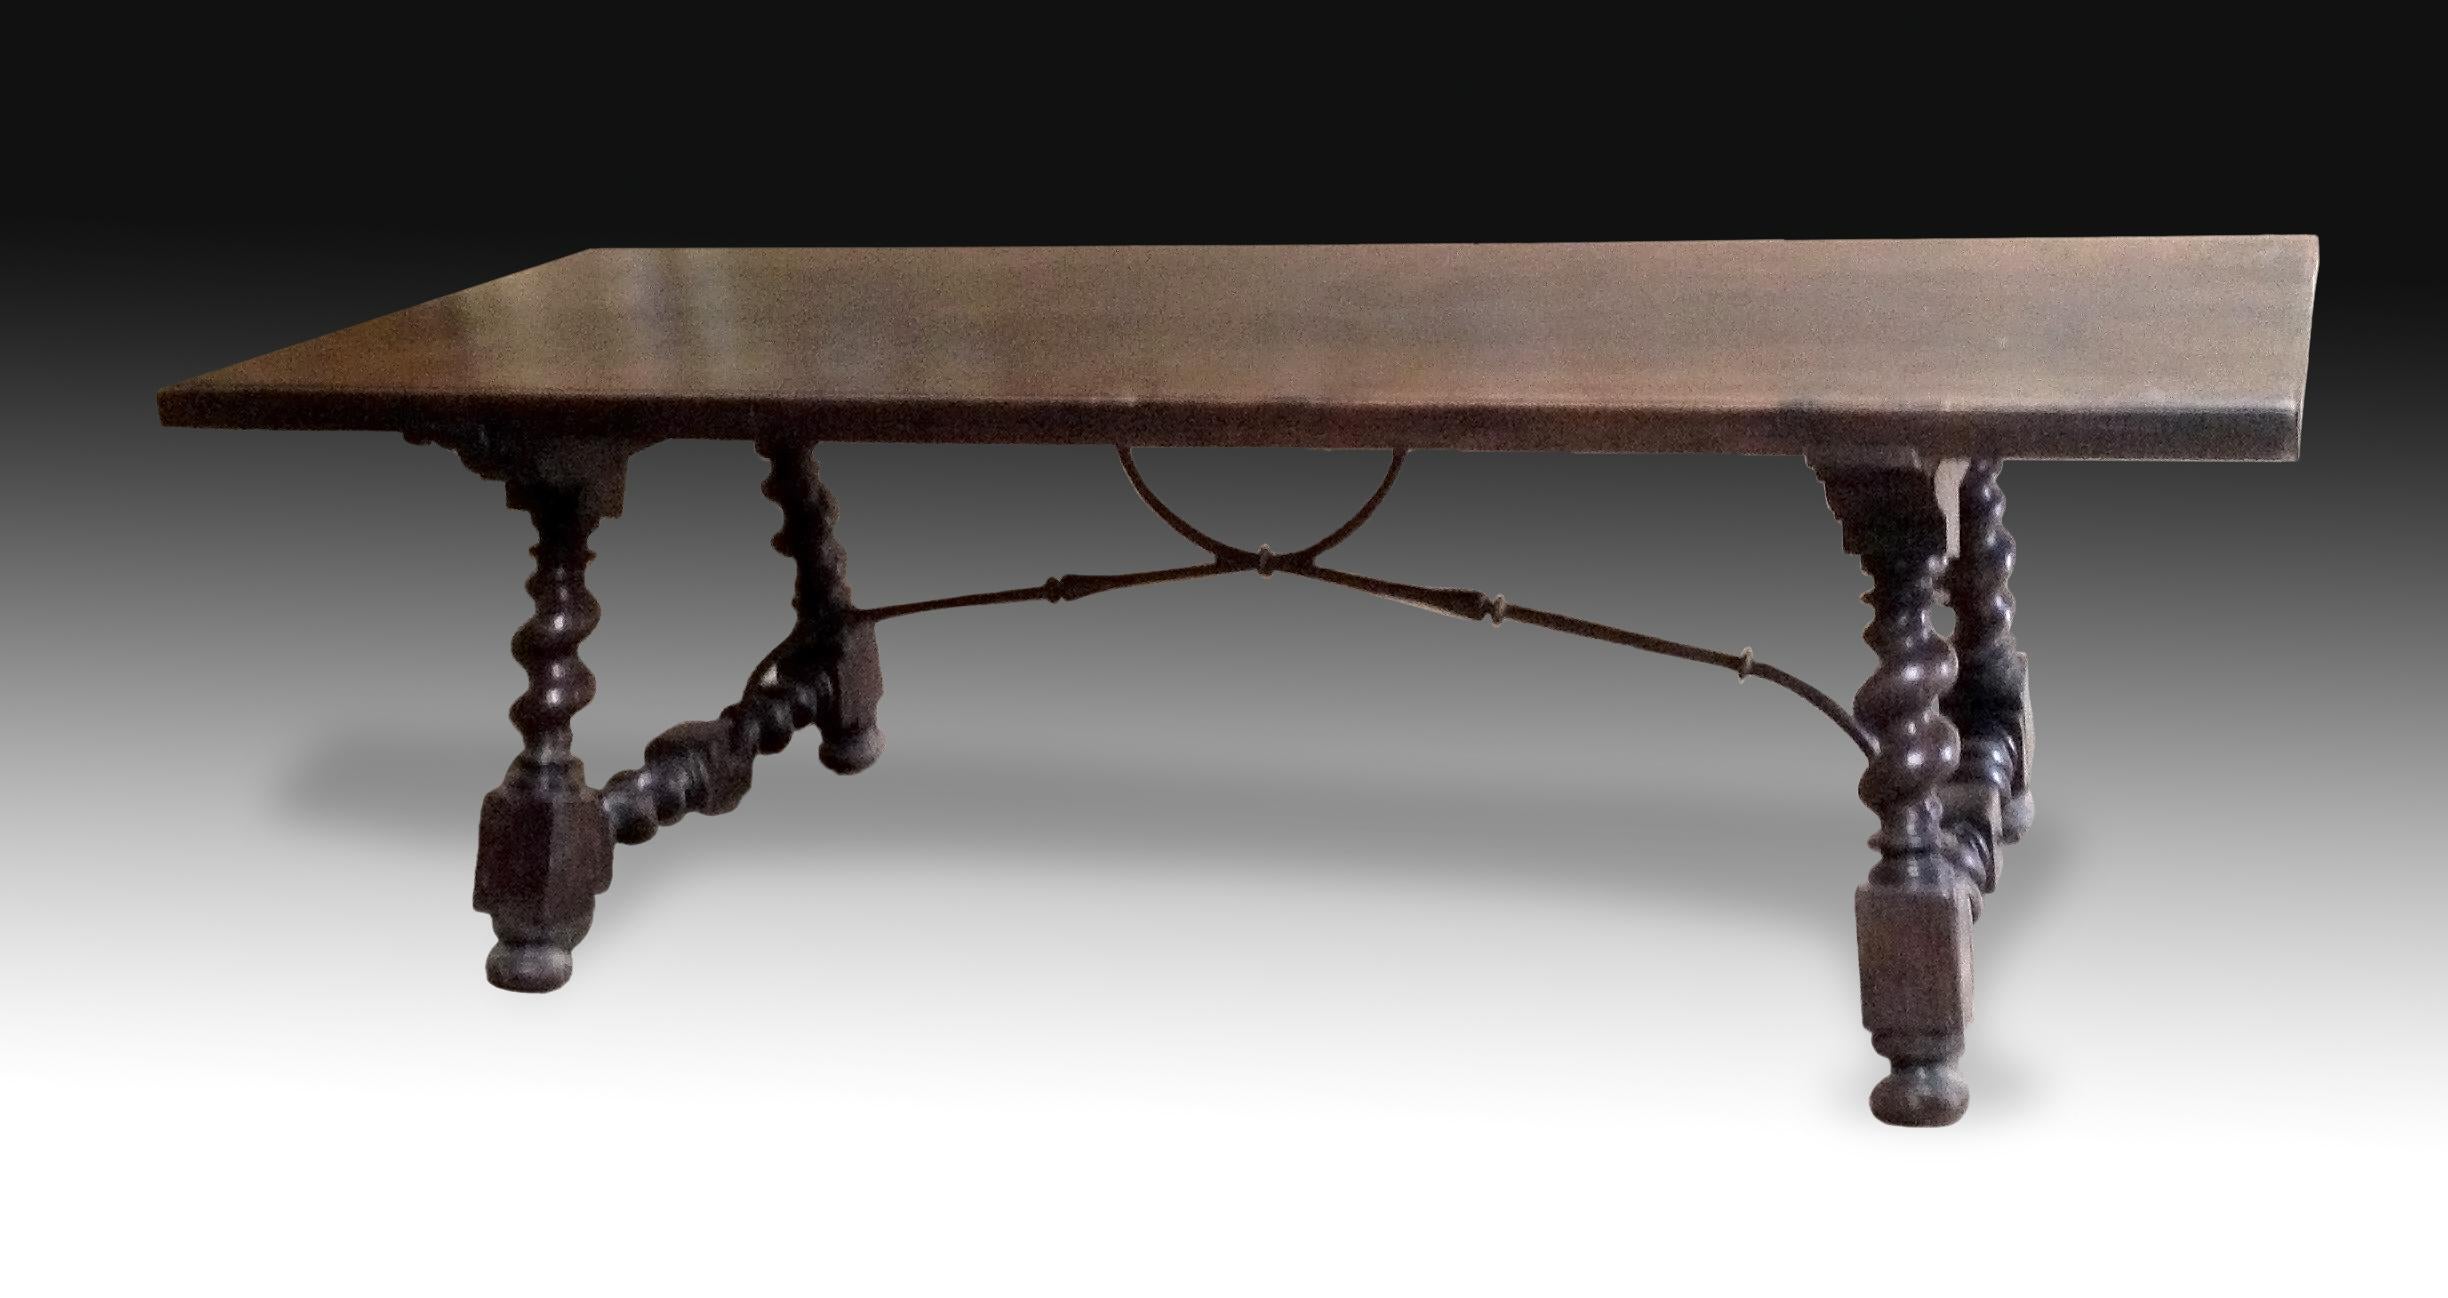 Baroque Revival Table with Solomonic Leg Walnut Wood, Metal 20th Century For Sale